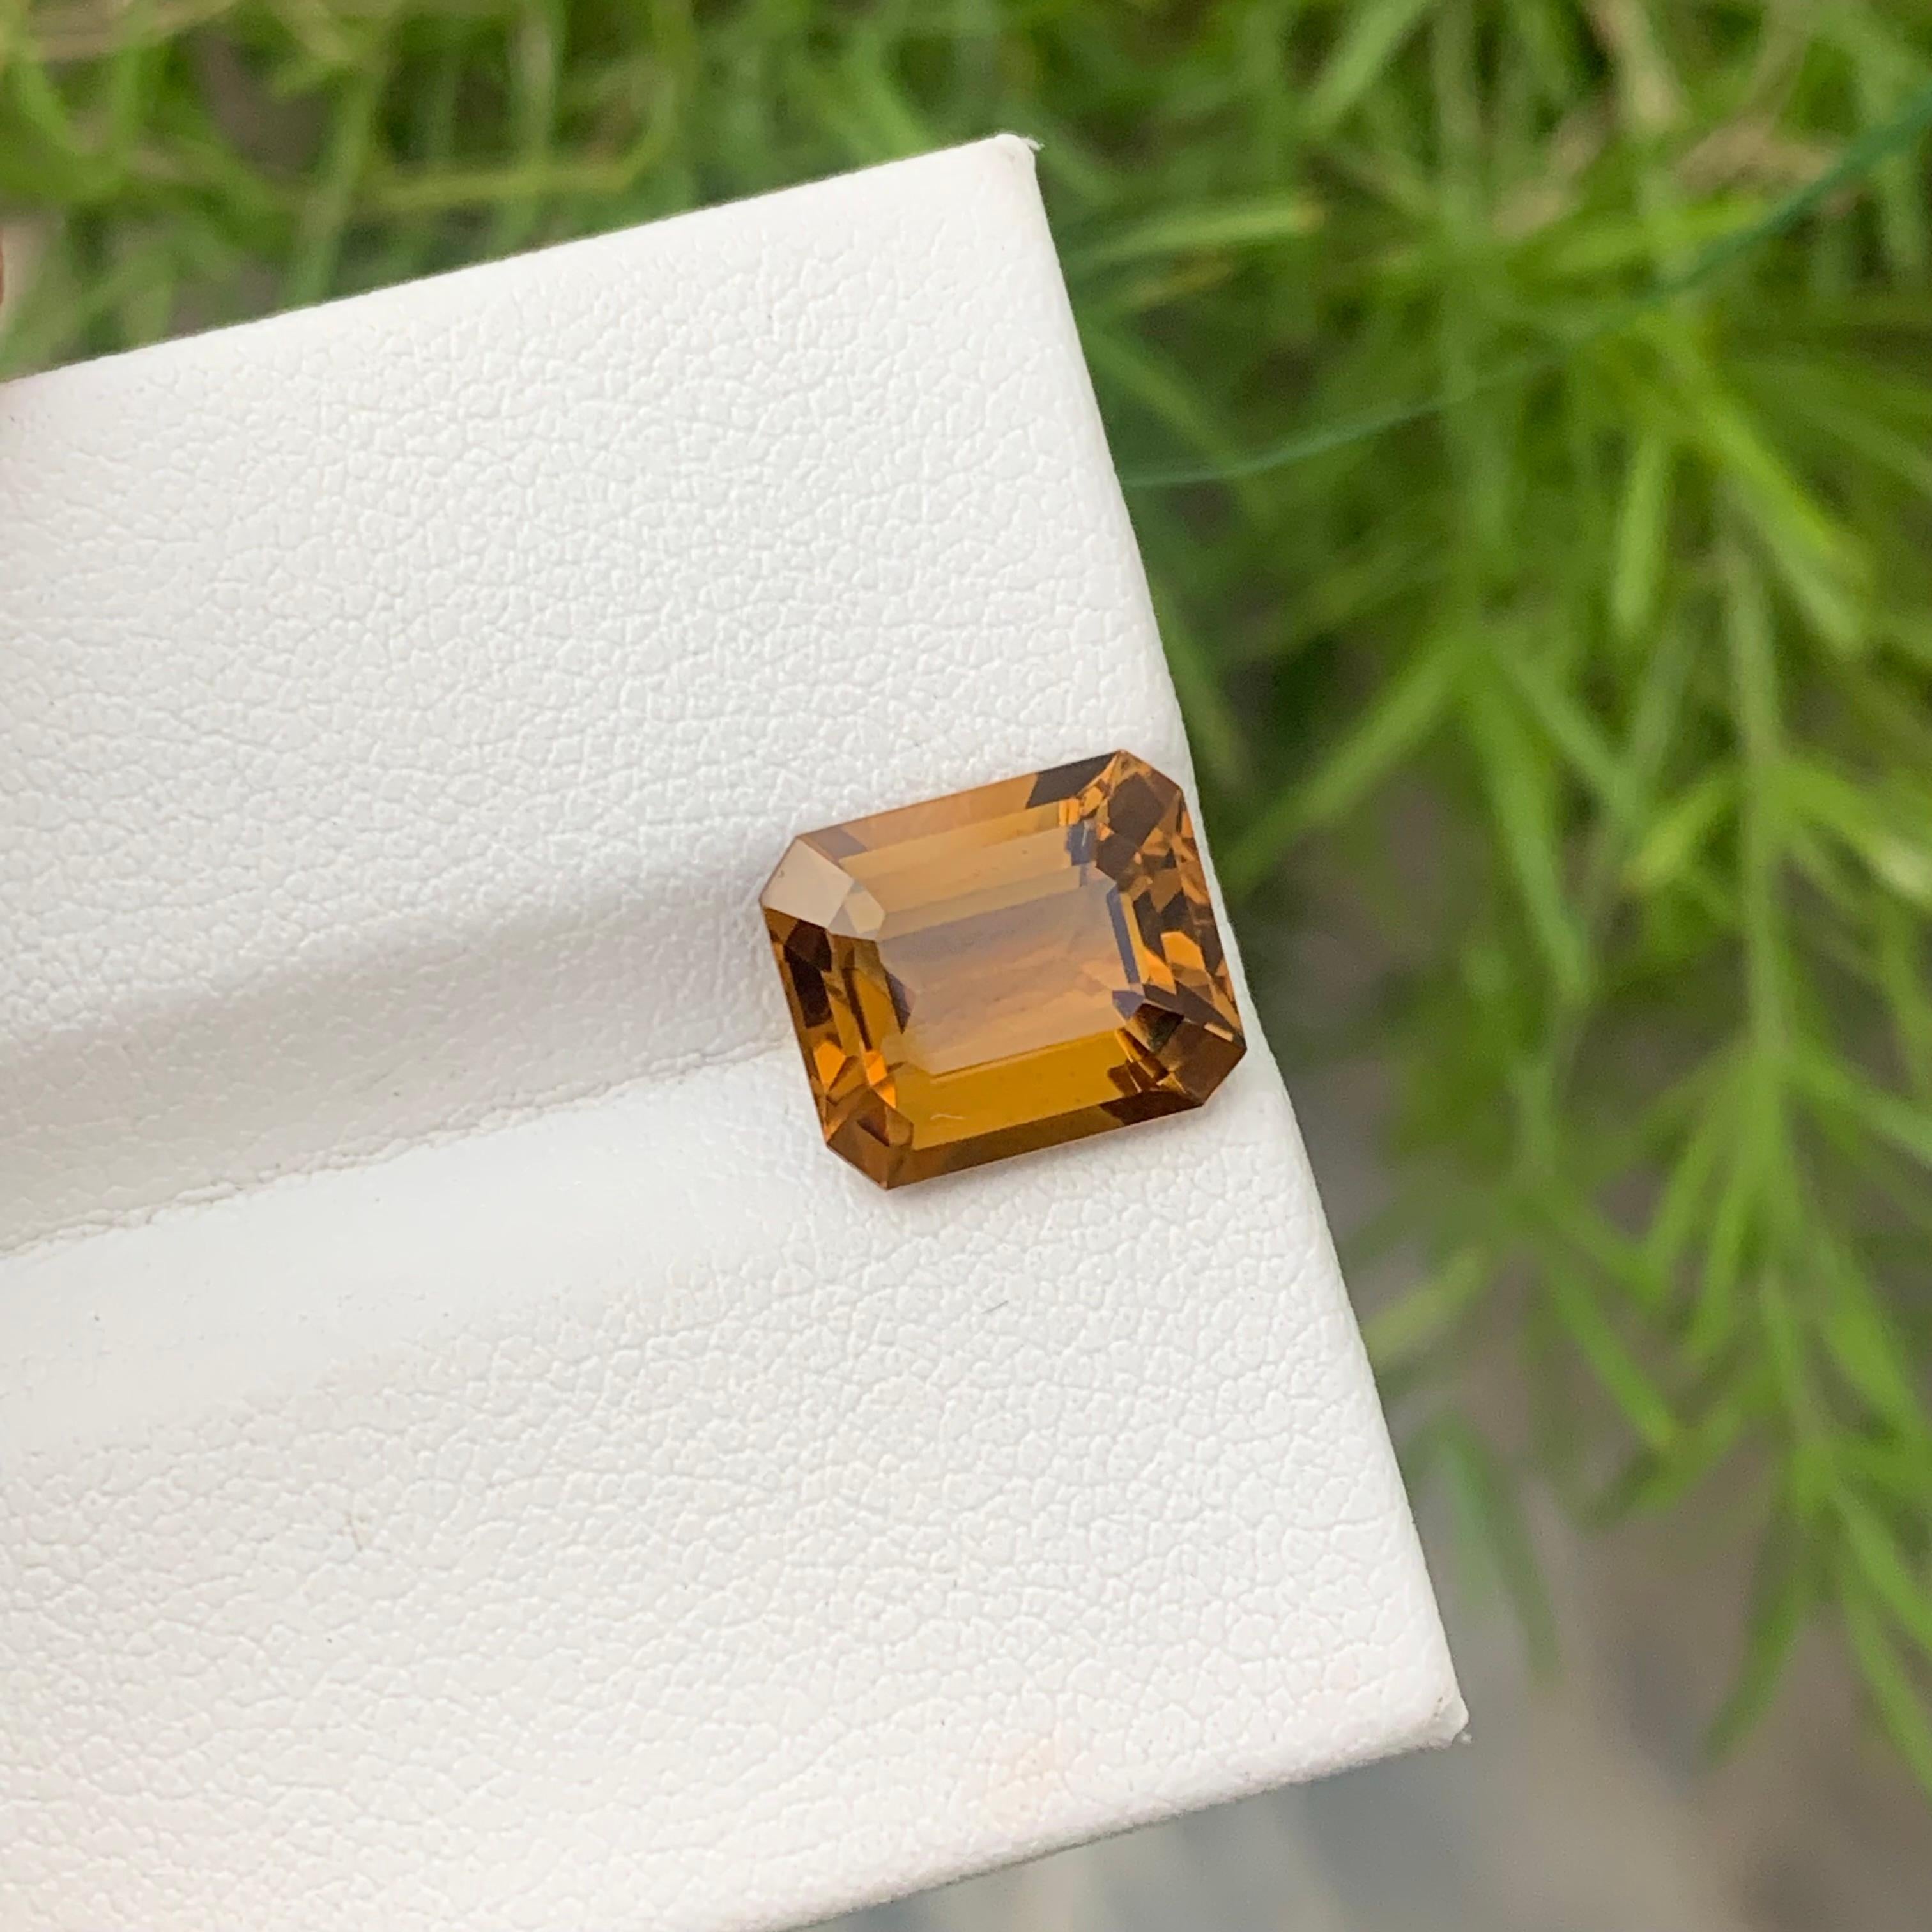 4.20 Carat Natural Loose Citrine Honey Color from Brazil Emerald Cut Gemstone For Sale 2